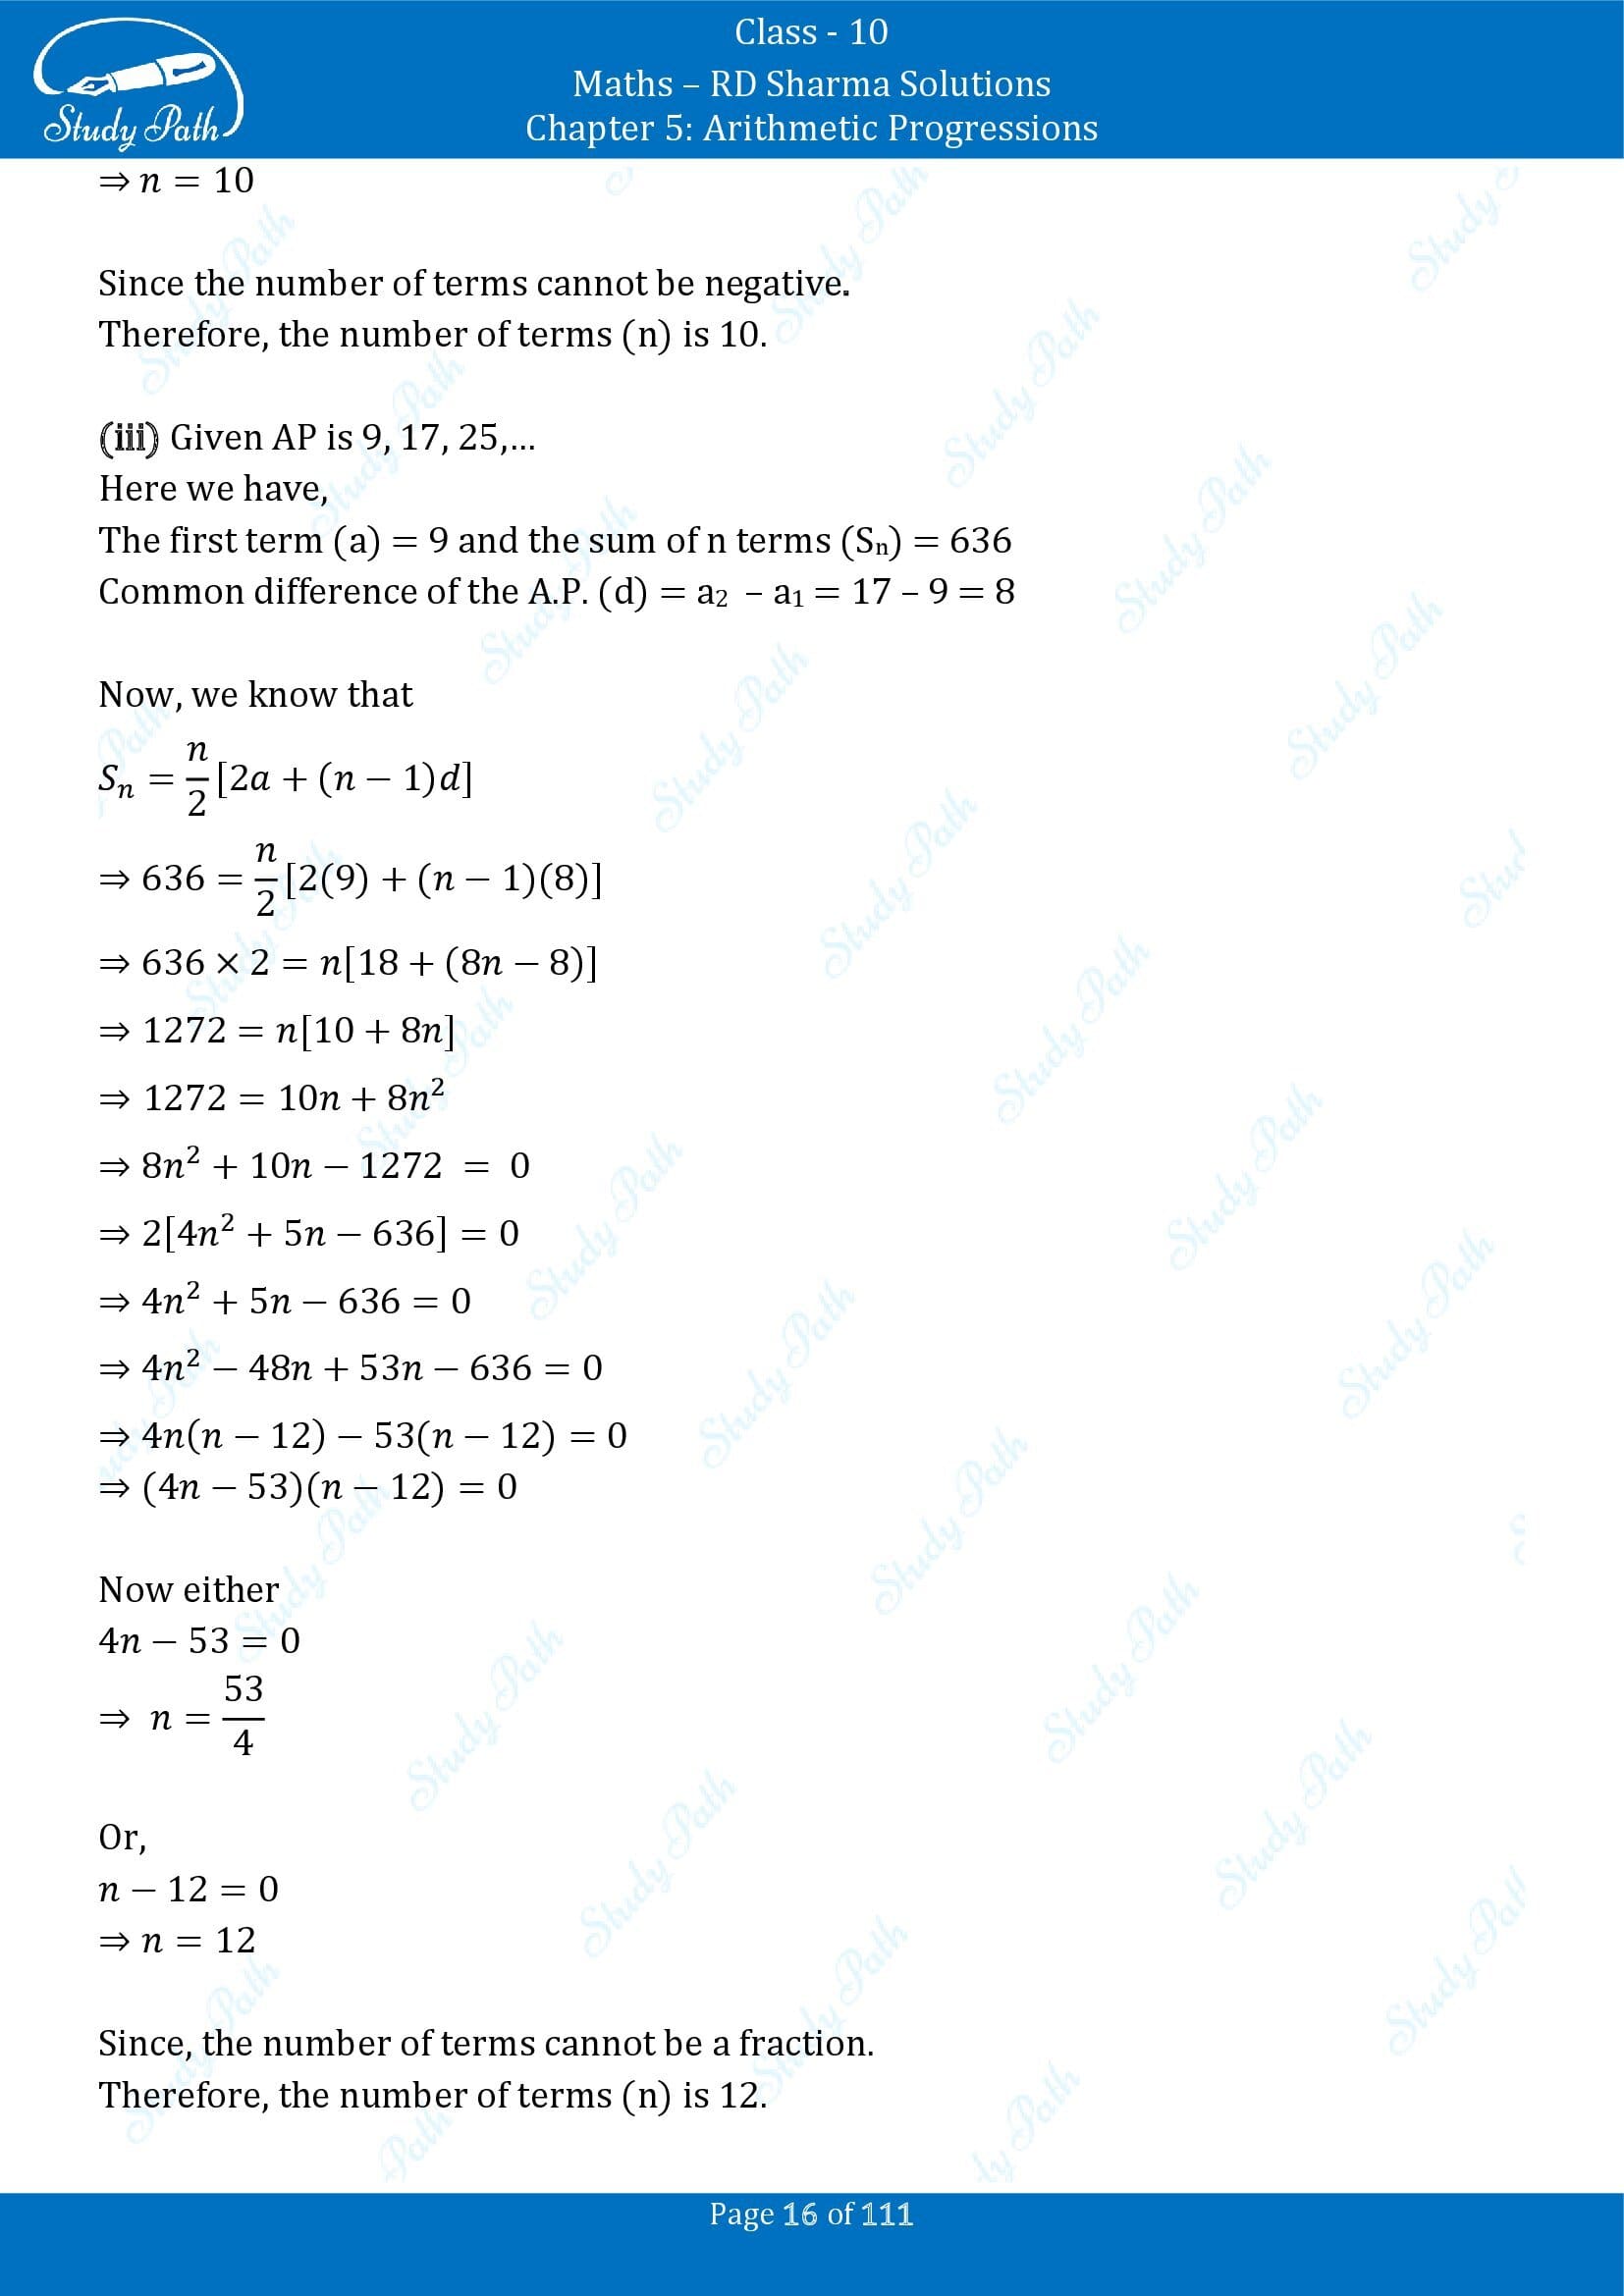 RD Sharma Solutions Class 10 Chapter 5 Arithmetic Progressions Exercise 5.6 00016